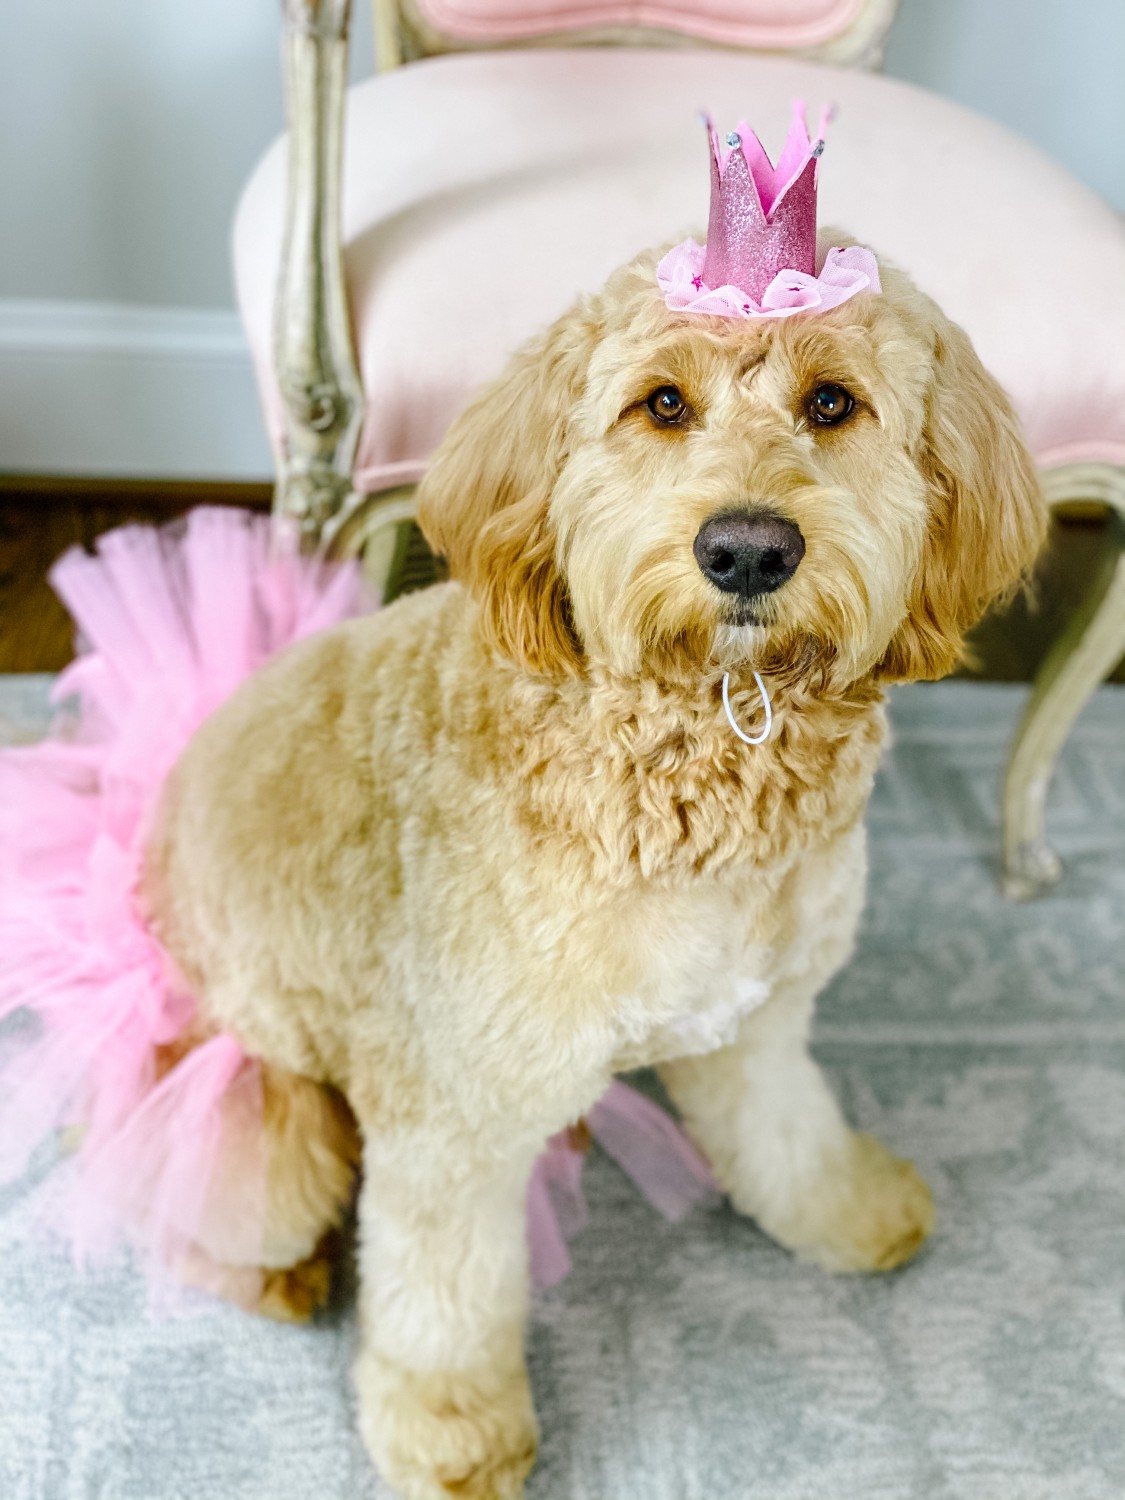 Dog in a little pink hat and tutu